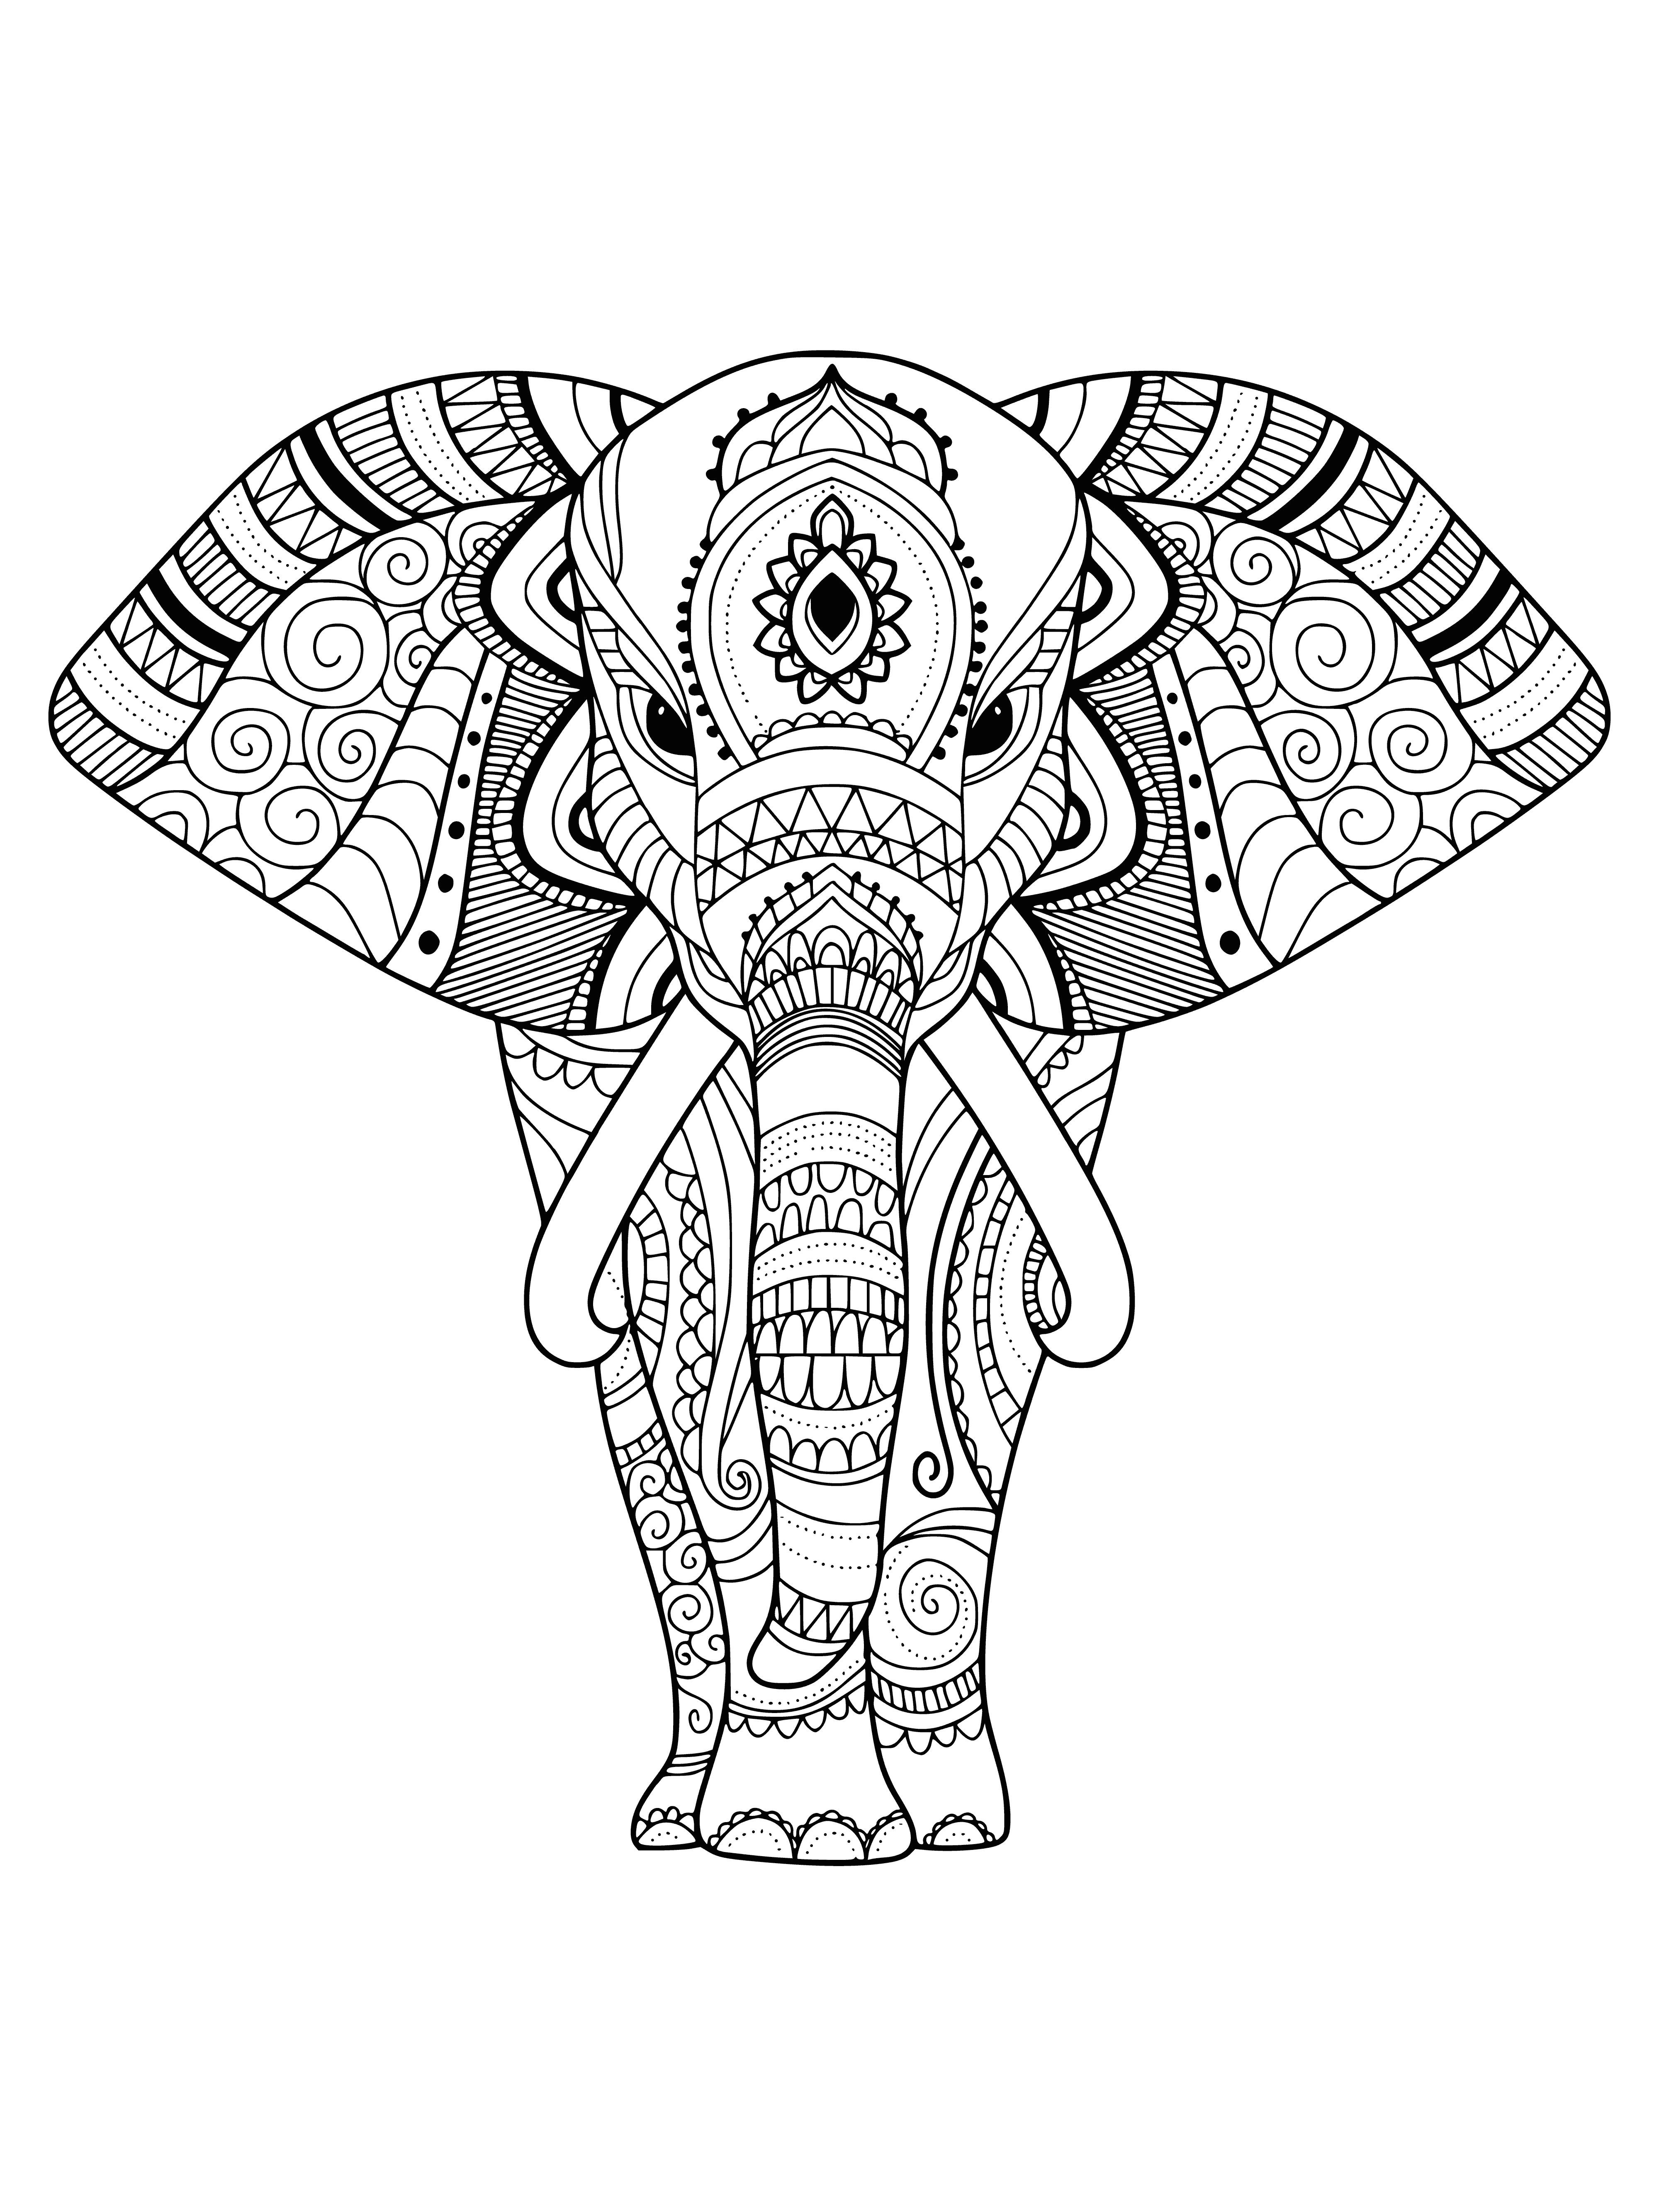 coloring page: Coloring page of an elephant with its trunk raised, large ears, and tusks; standing on grass. #coloringpage #elephant